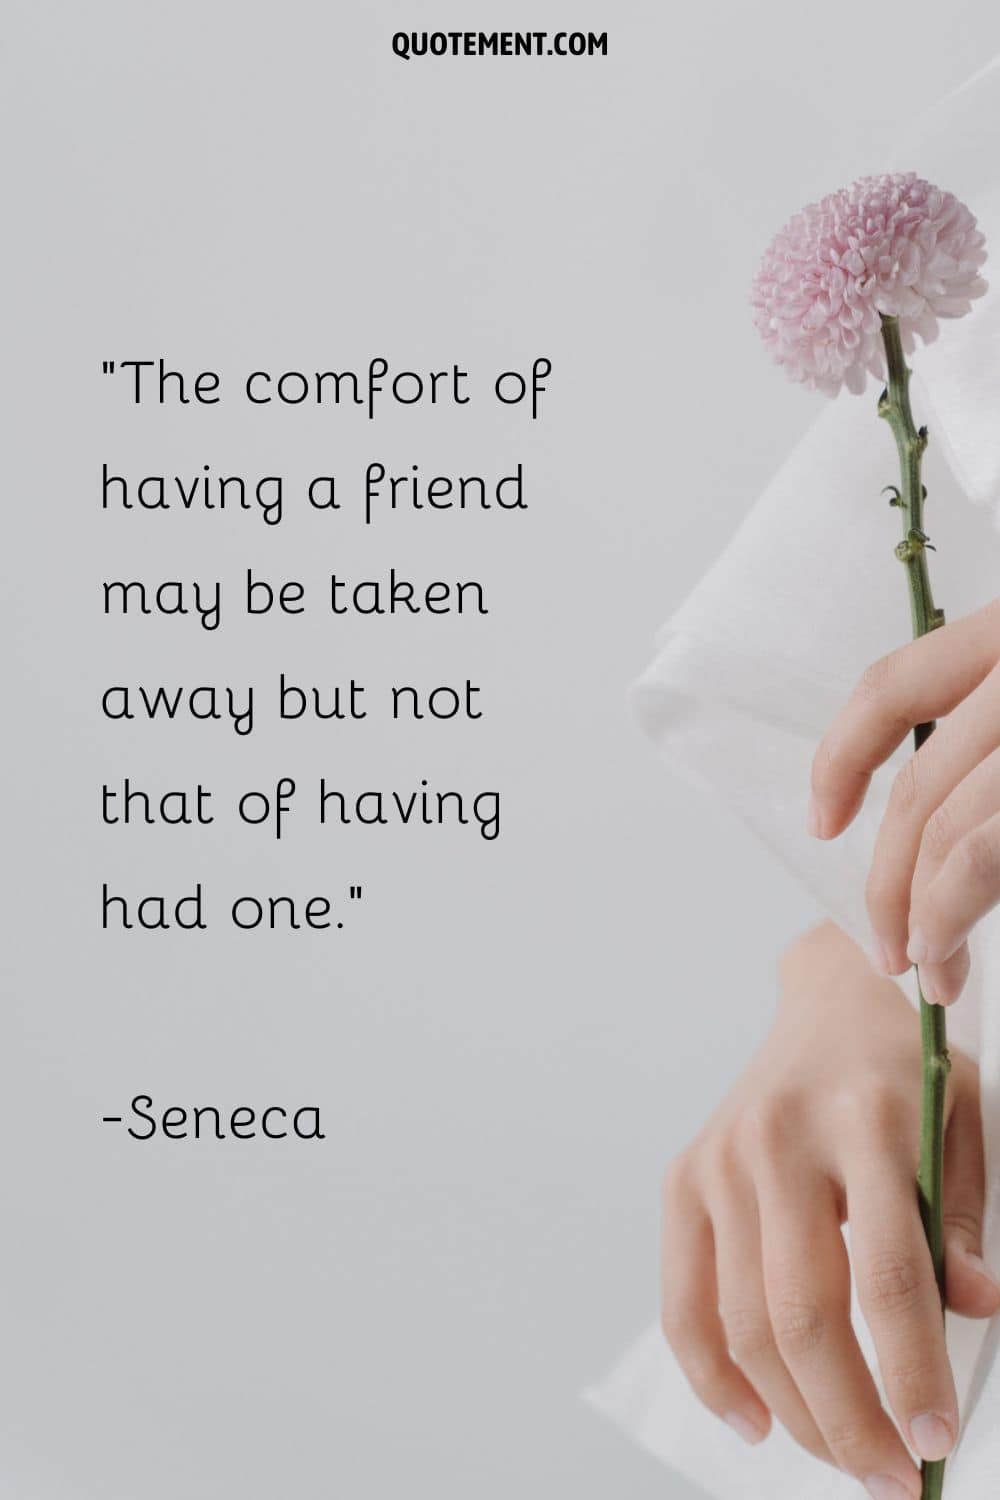 The comfort of having a friend may be taken away but not that of having had one.